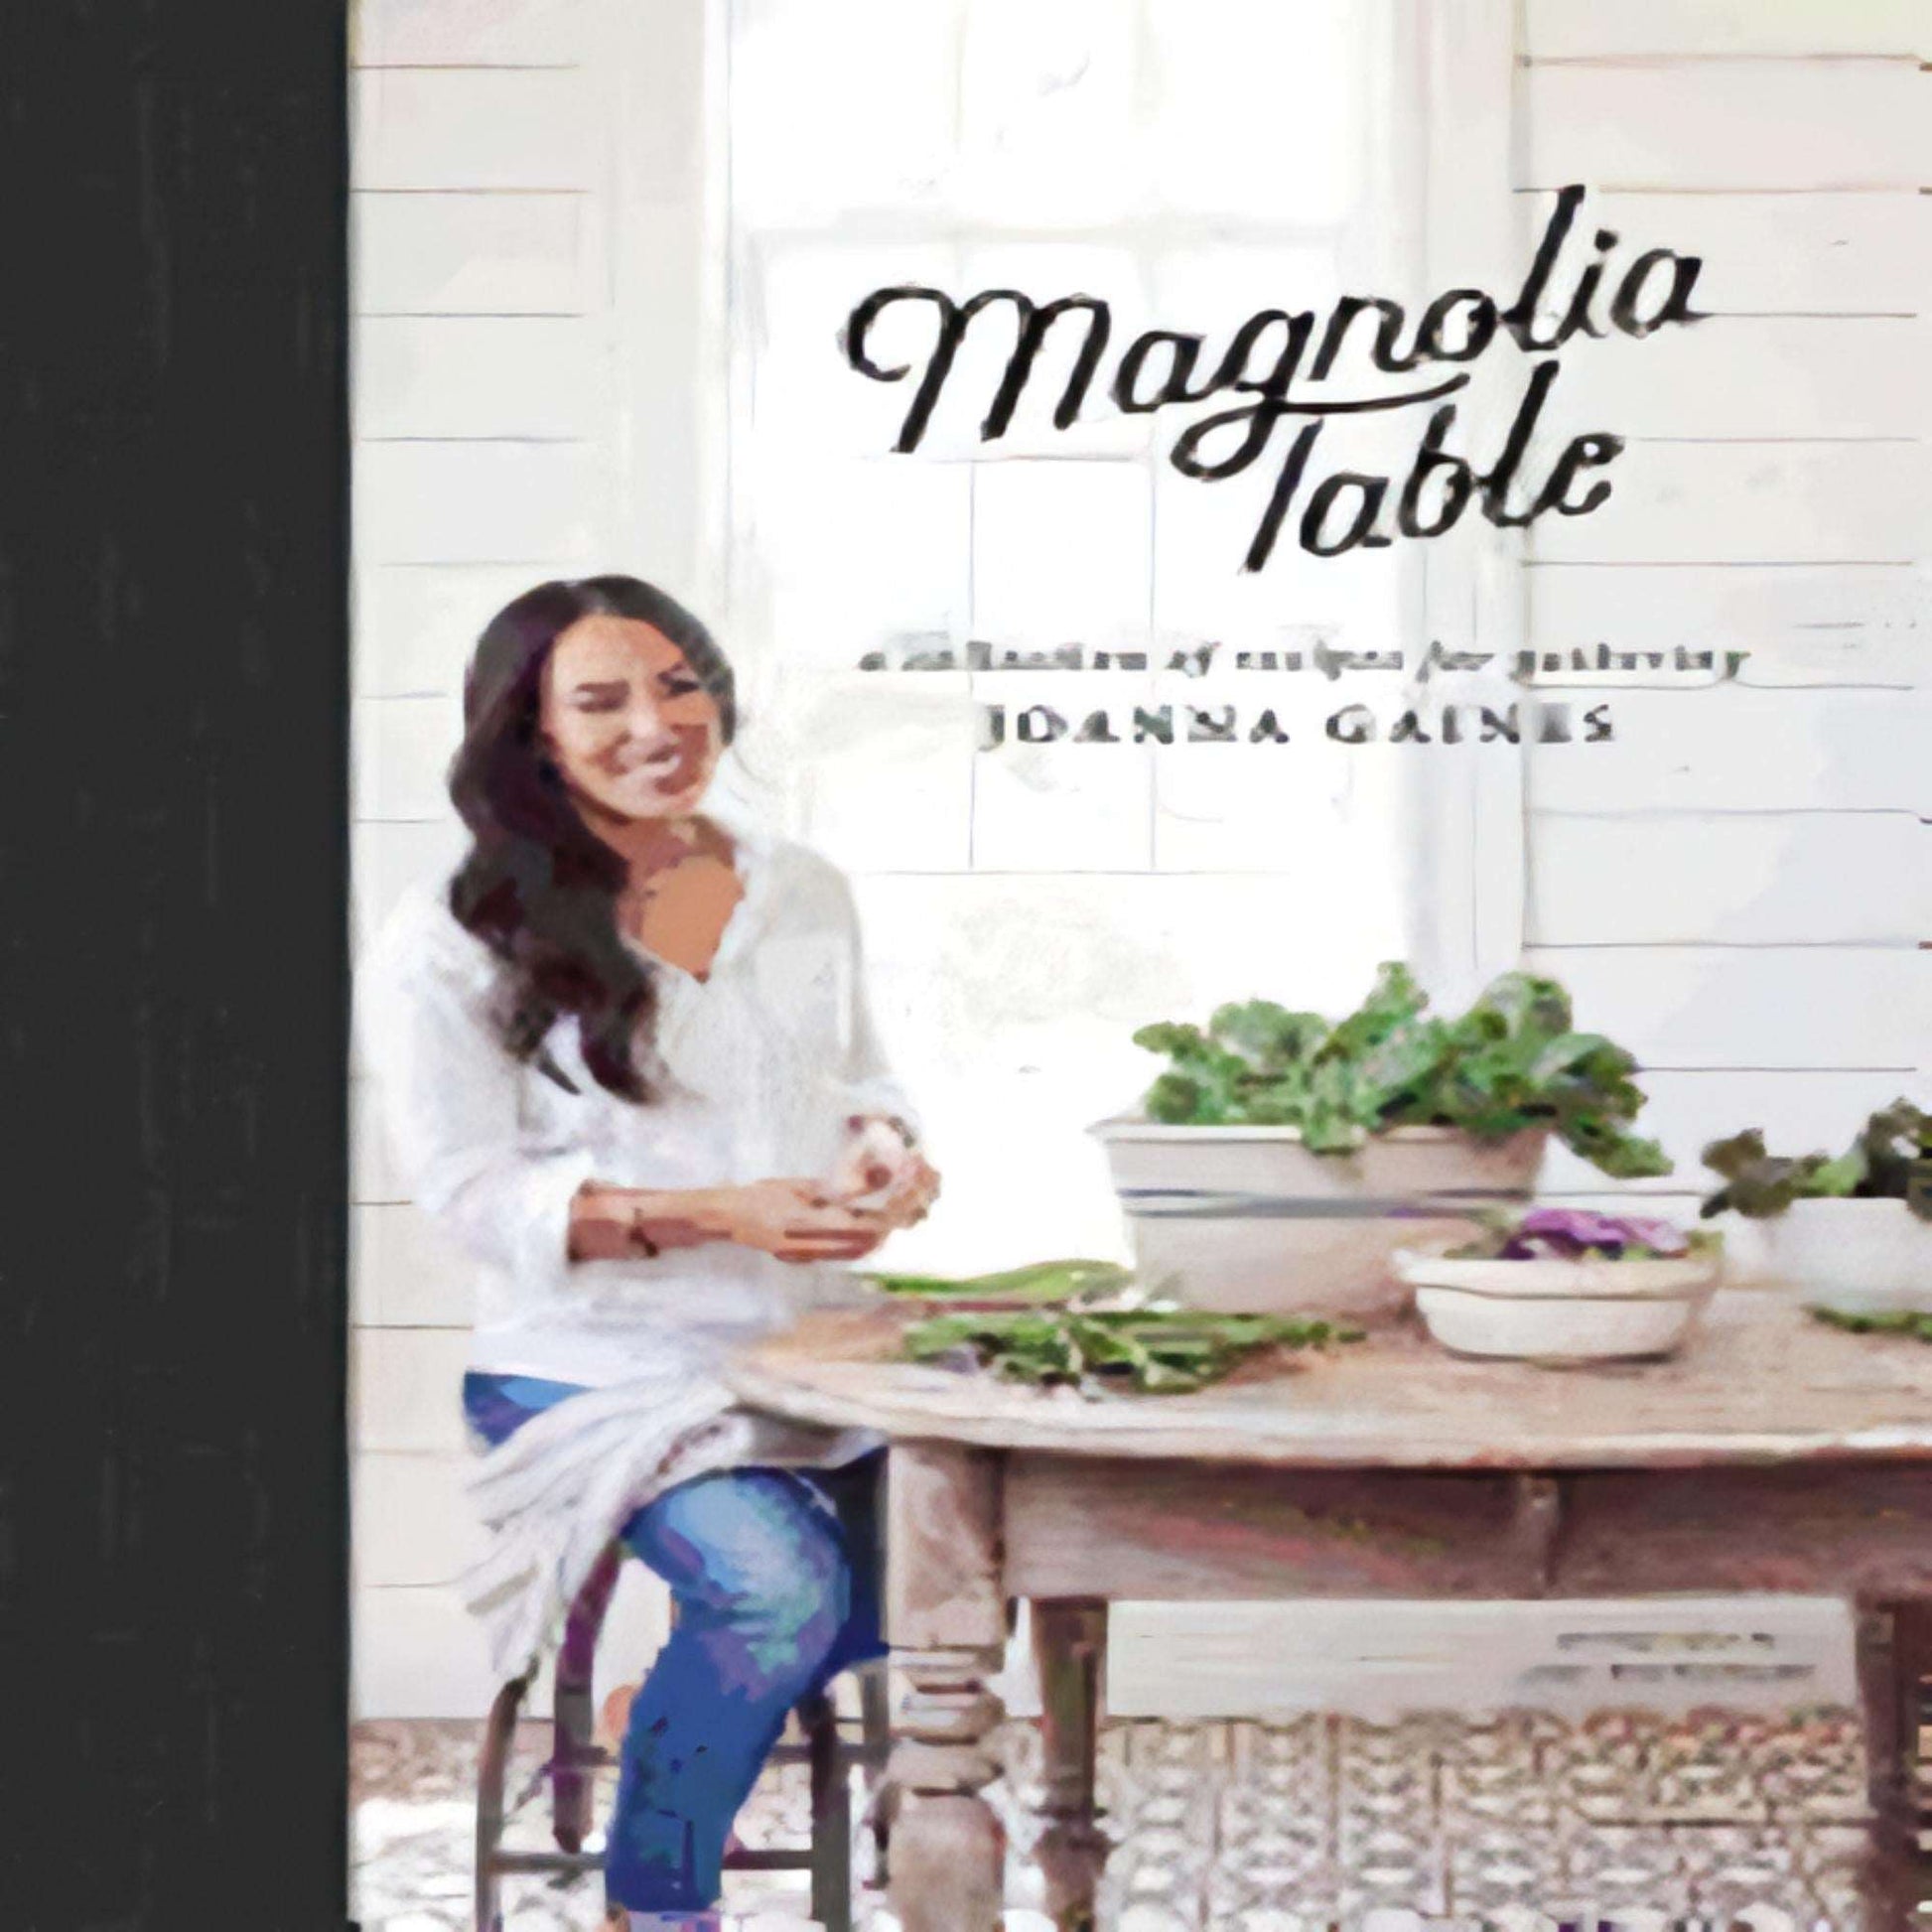 TEXTBOOK Magnolia Table: A Collection of Recipes for Gathering129-022223-006282015XDPGBOOKSTORE.COM. Today's Bestsellers.